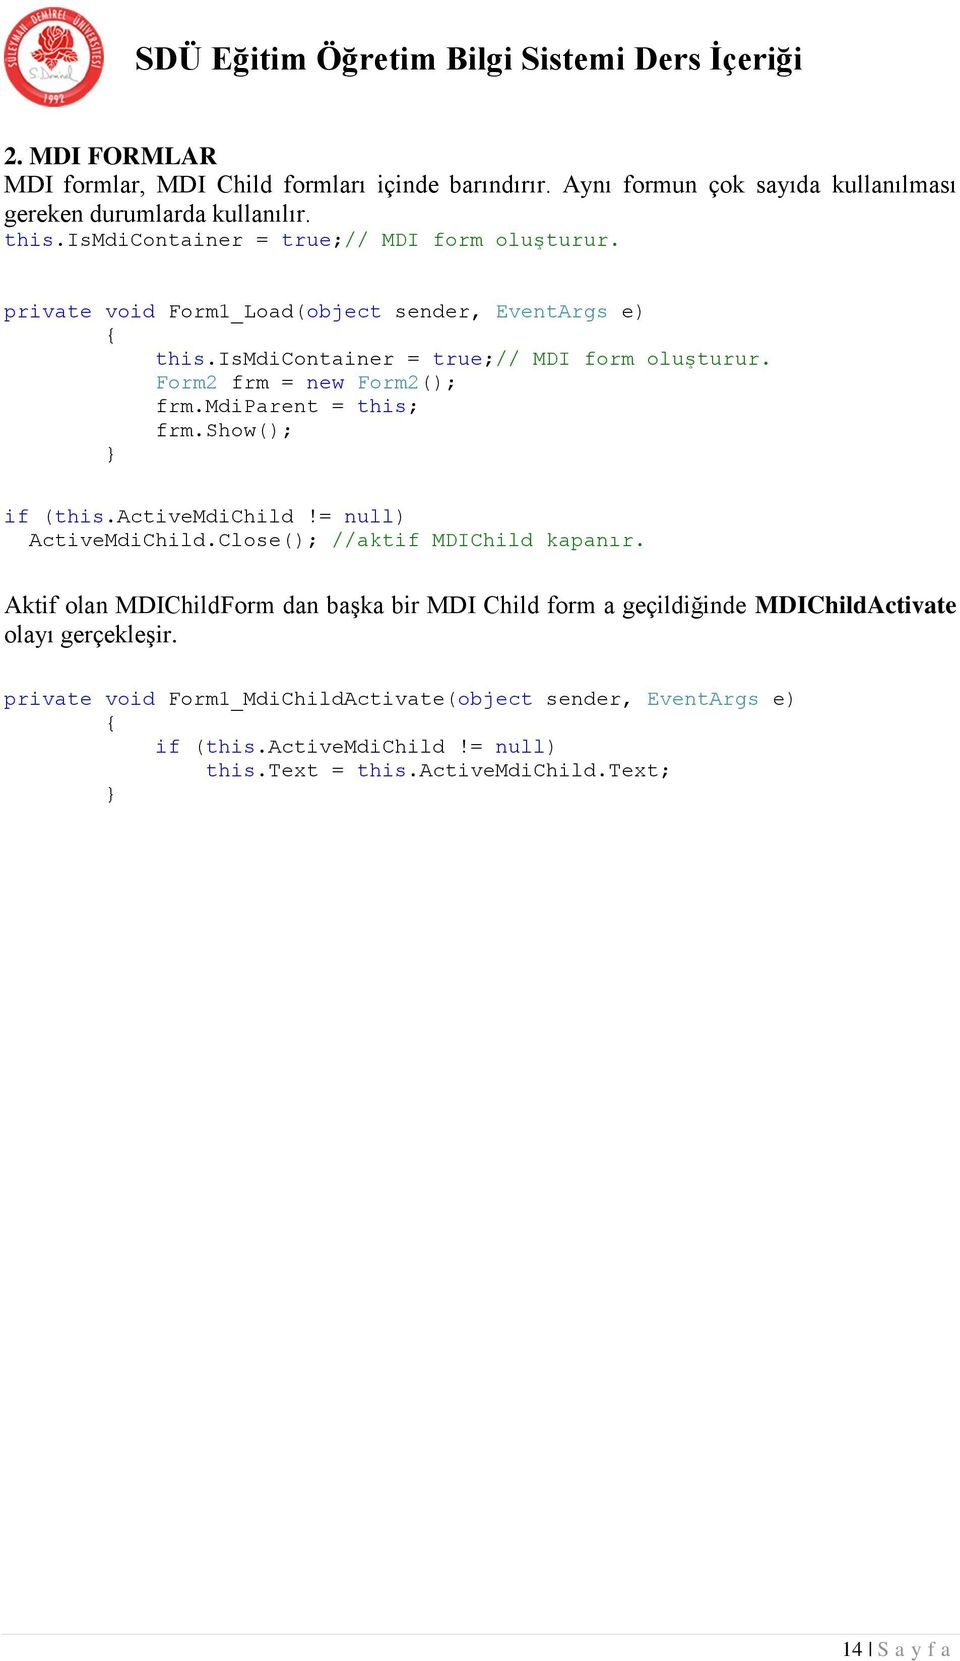 mdiparent = this; frm.show(); if (this.activemdichild!= null) ActiveMdiChild.Close(); //aktif MDIChild kapanır.